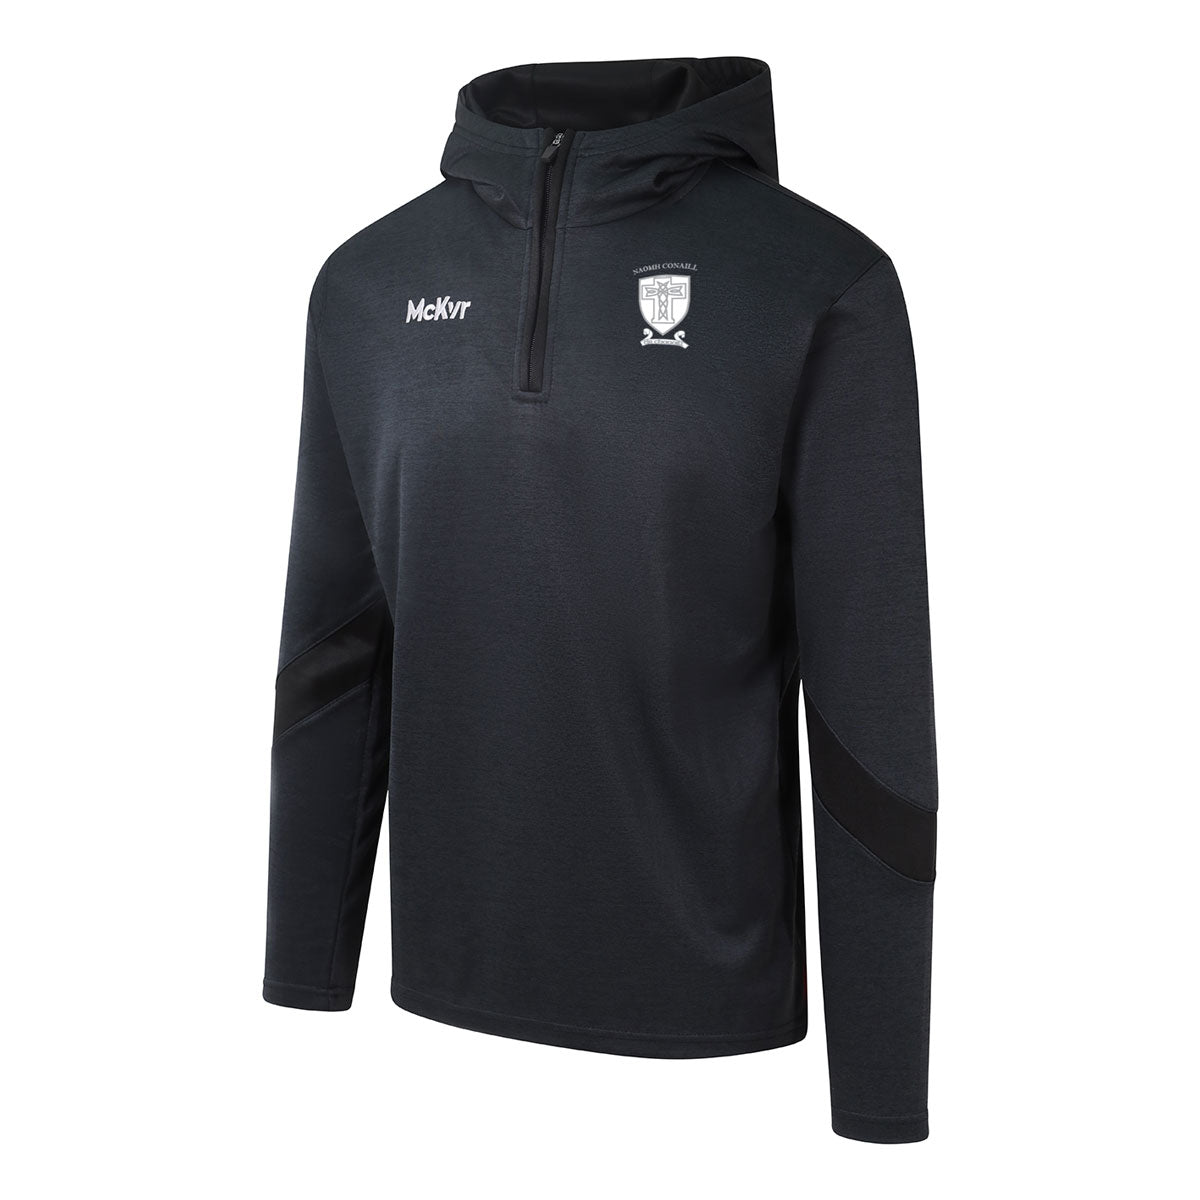 Mc Keever Naomh Conaill Donegal Core 22 1/4 Zip Hoodie - Adult - Black